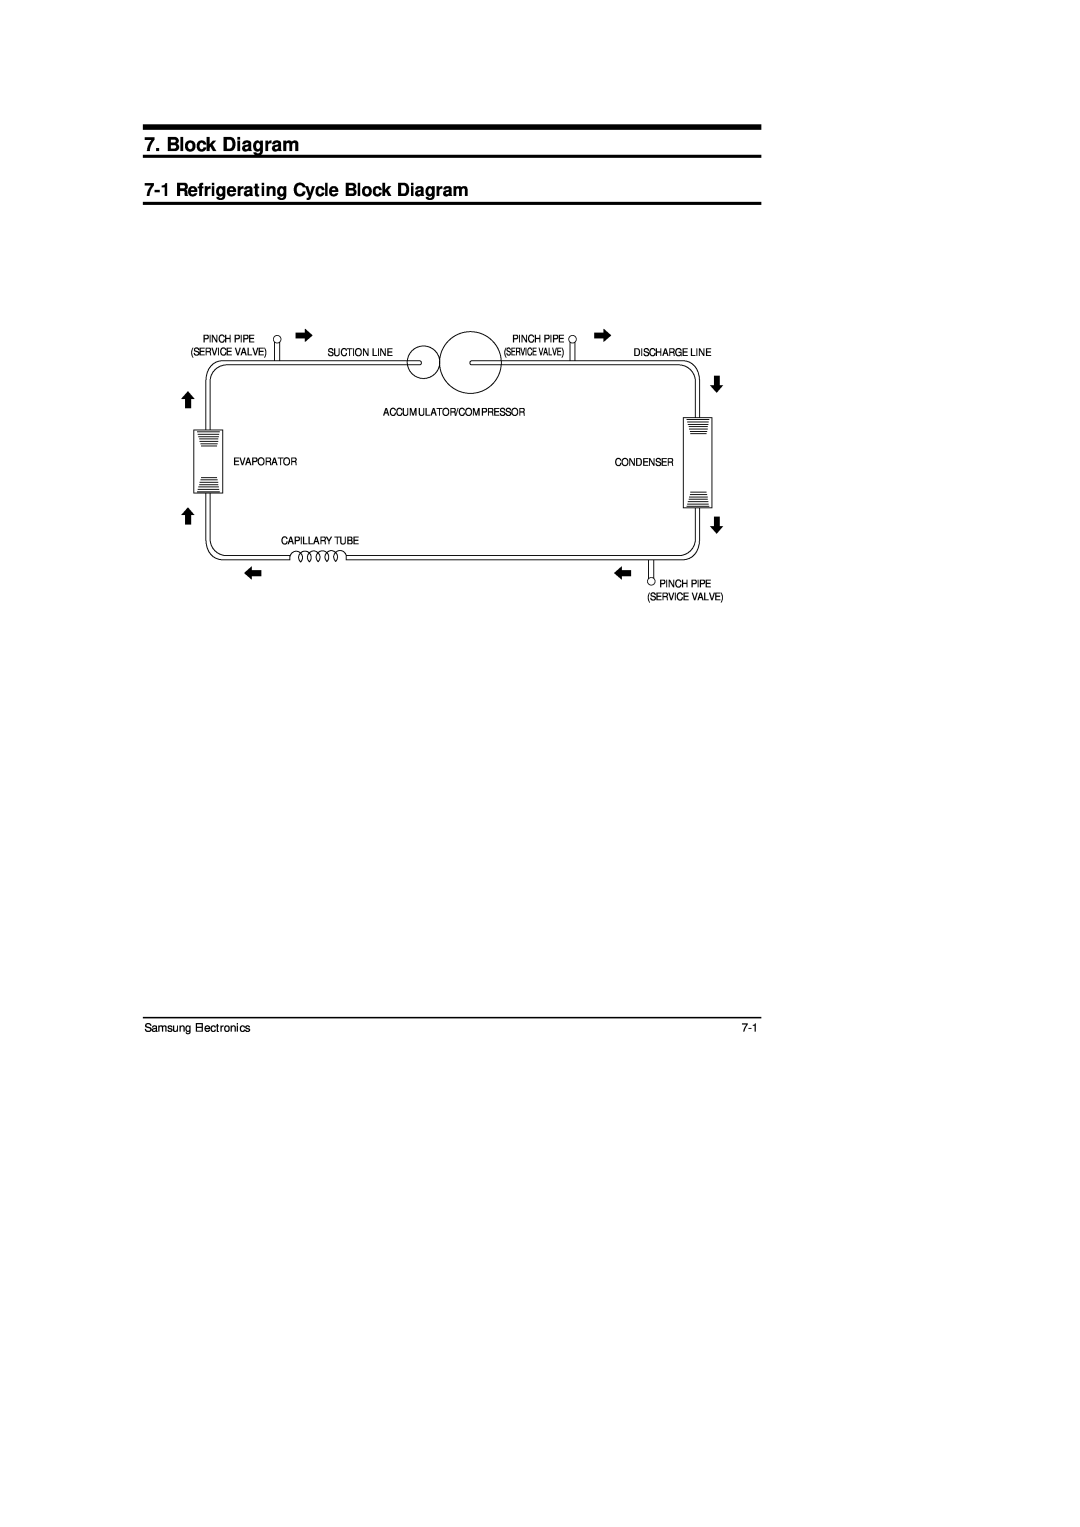 Samsung AW05B05A(AW0500 specifications 7-1Refrigerating Cycle Block Diagram, Samsung Electronics, Service Valve 